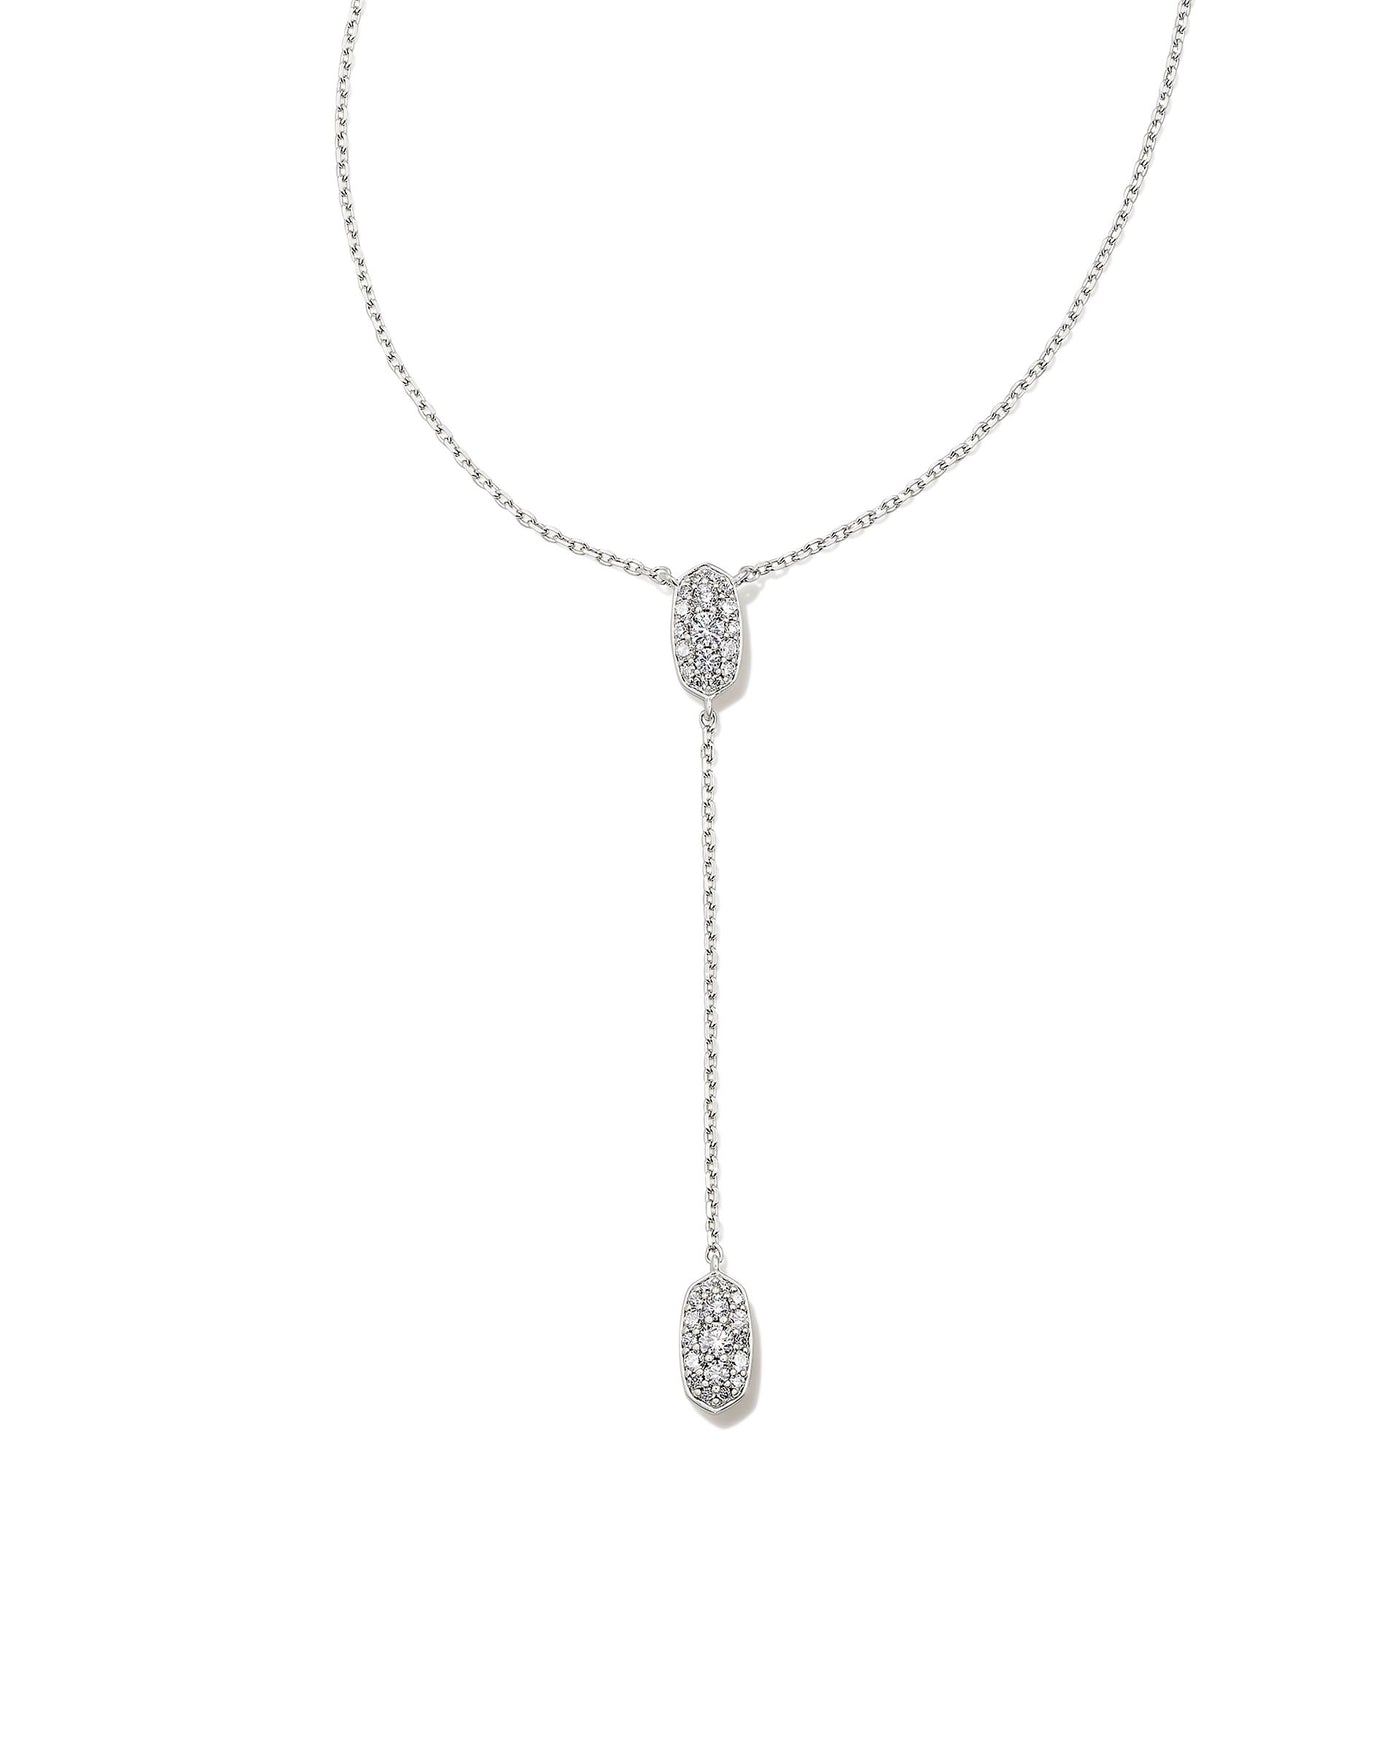 Kendra Scott Grayson Y Necklace White Crystal-Necklaces-Kendra Scott-Market Street Nest, Fashionable Clothing, Shoes and Home Décor Located in Mabank, TX